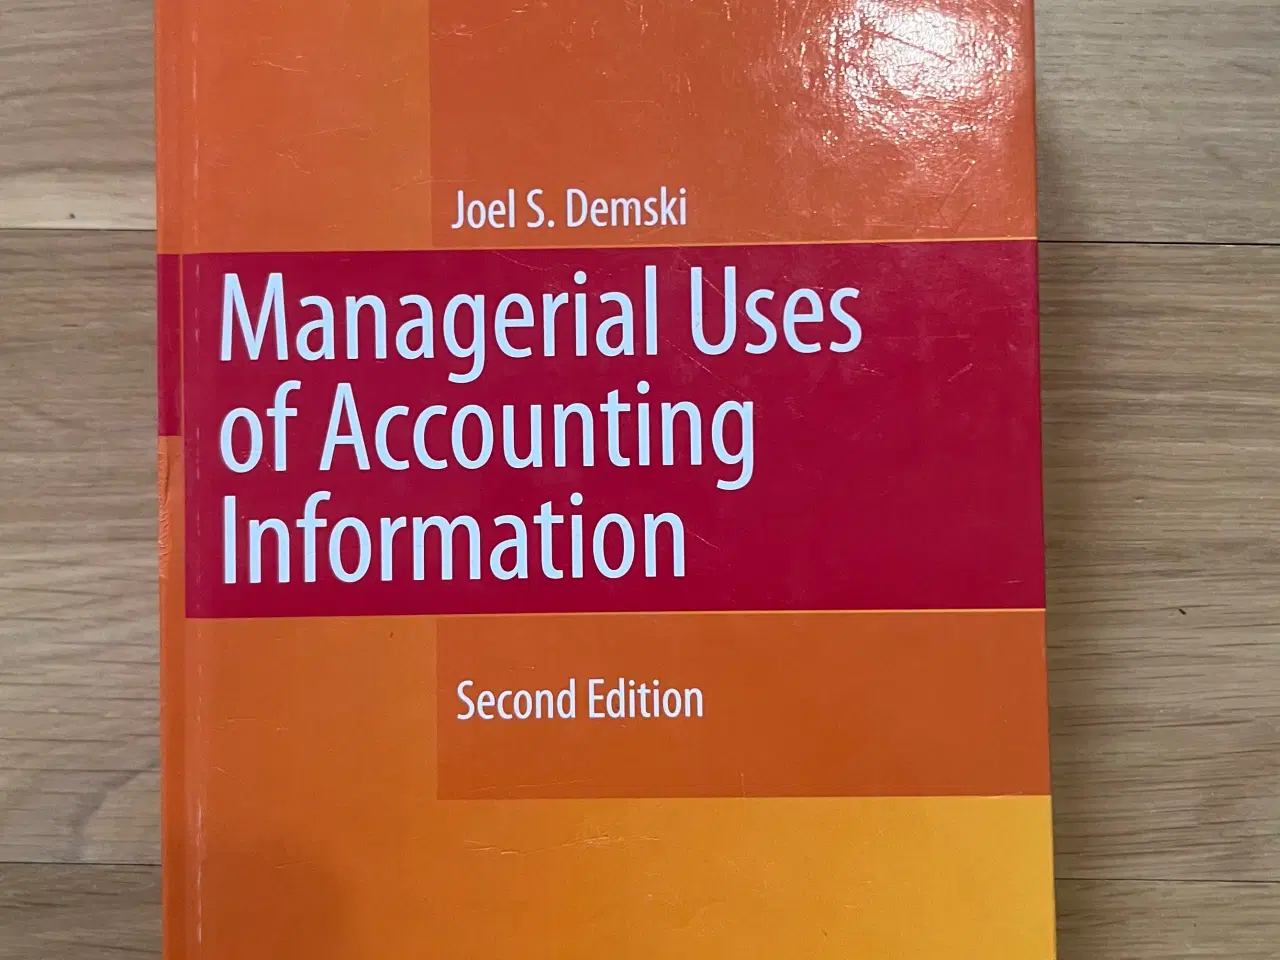 Billede 1 - Managerial Uses of Accounting Information